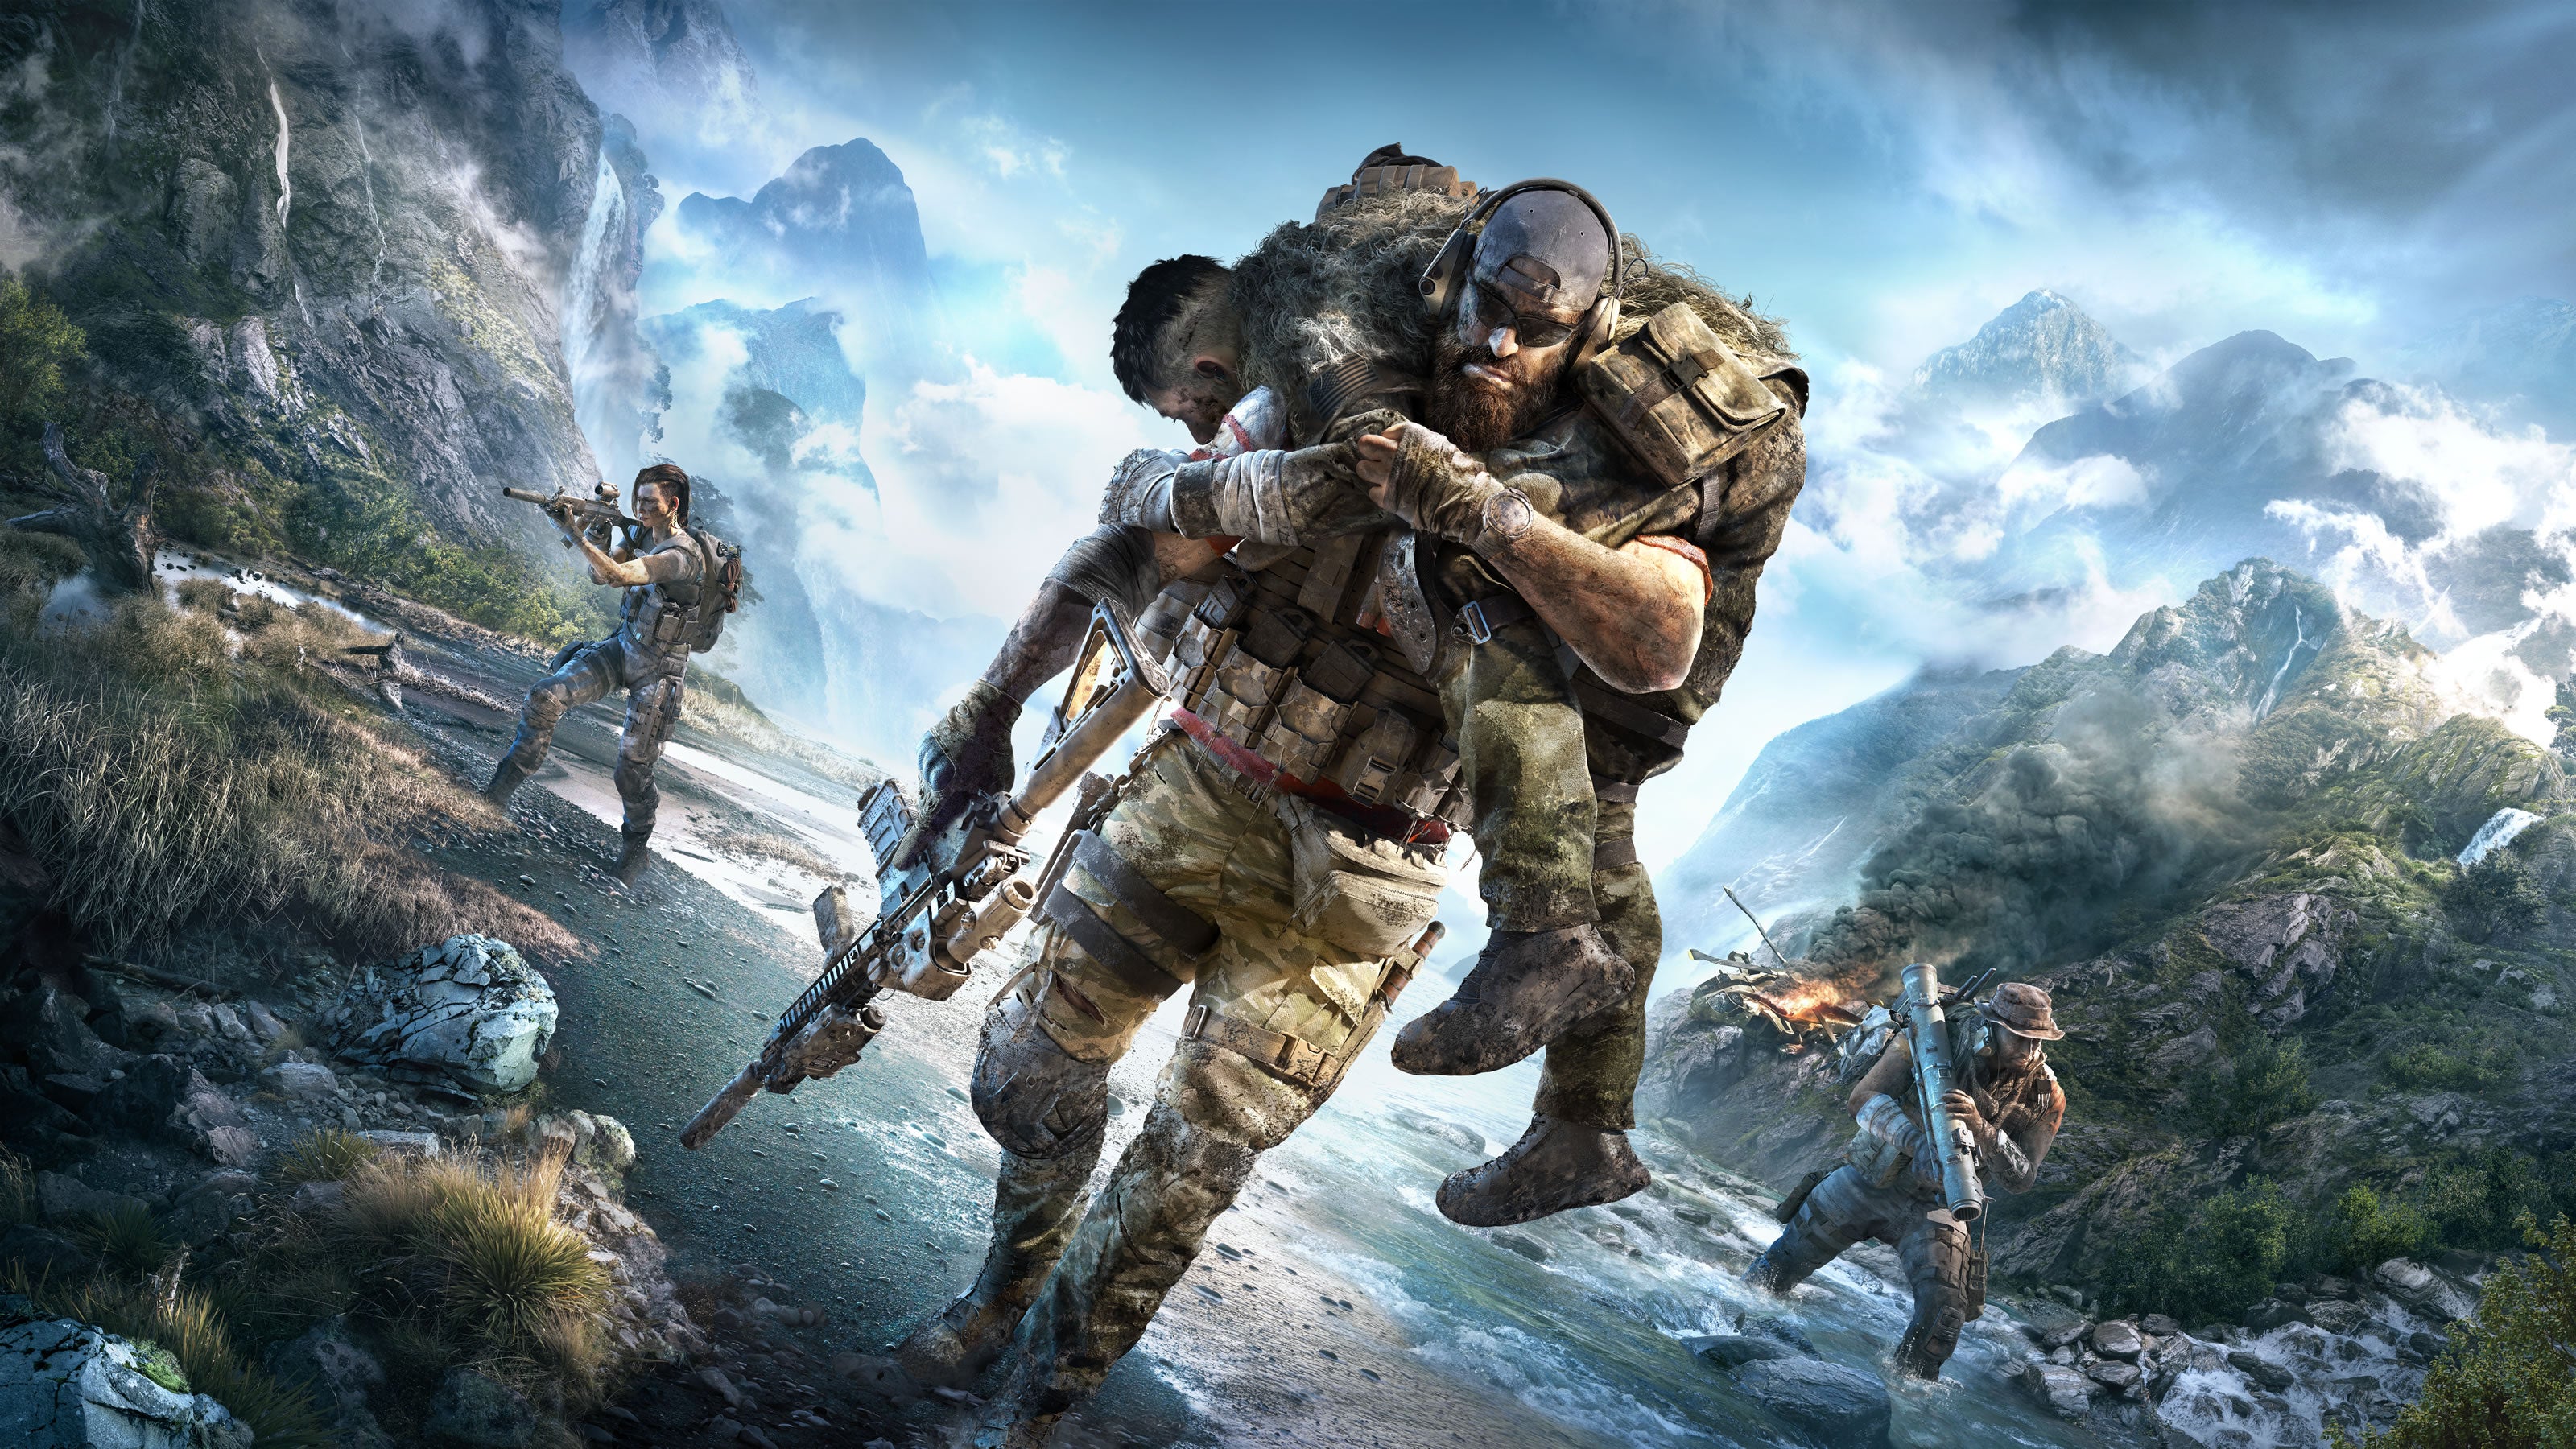 Image for Ubisoft has ceased development on Ghost Recon Breakpoint